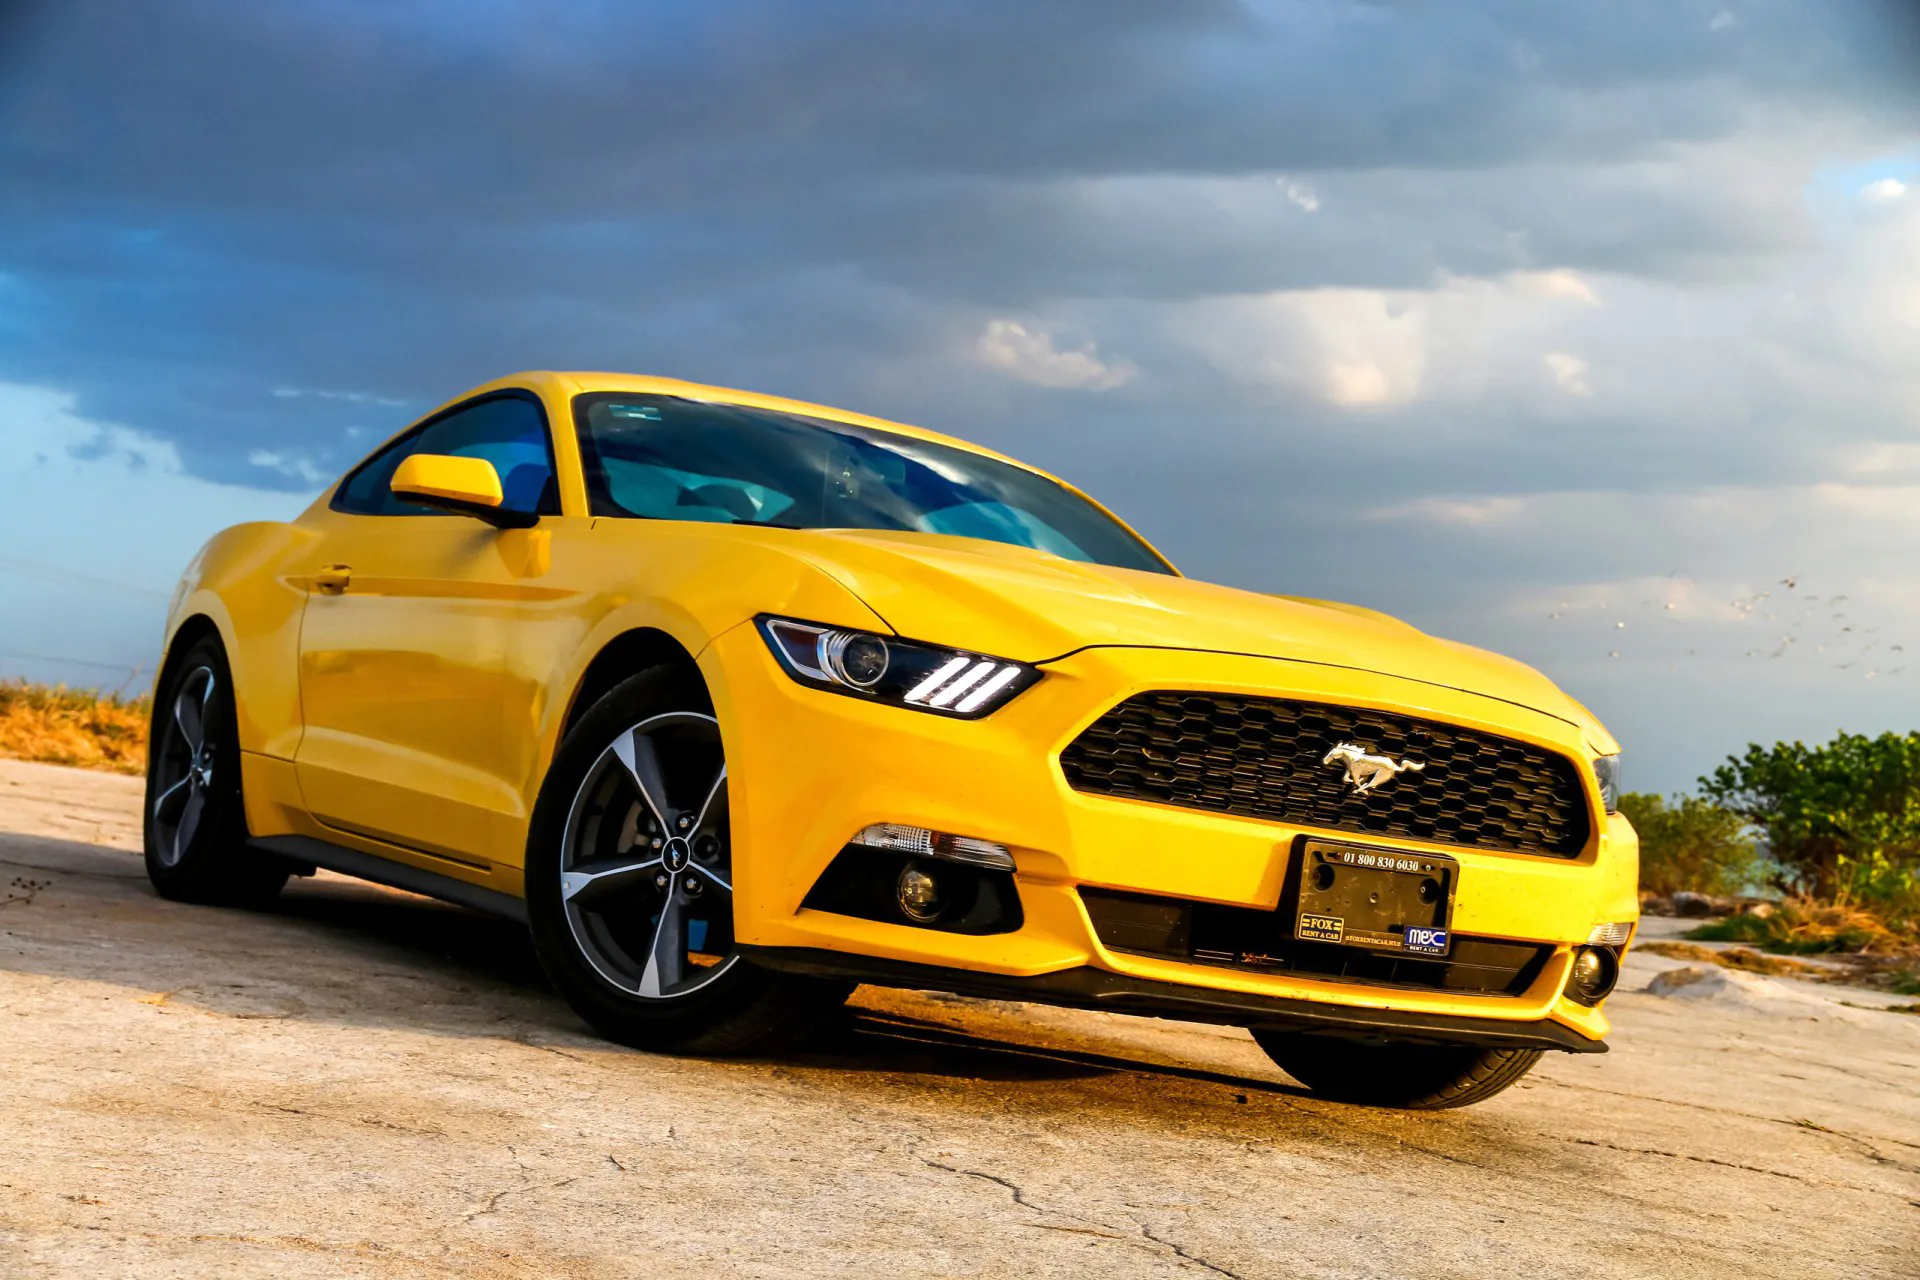 2017 Yellow Ford Mustang at the countryside.